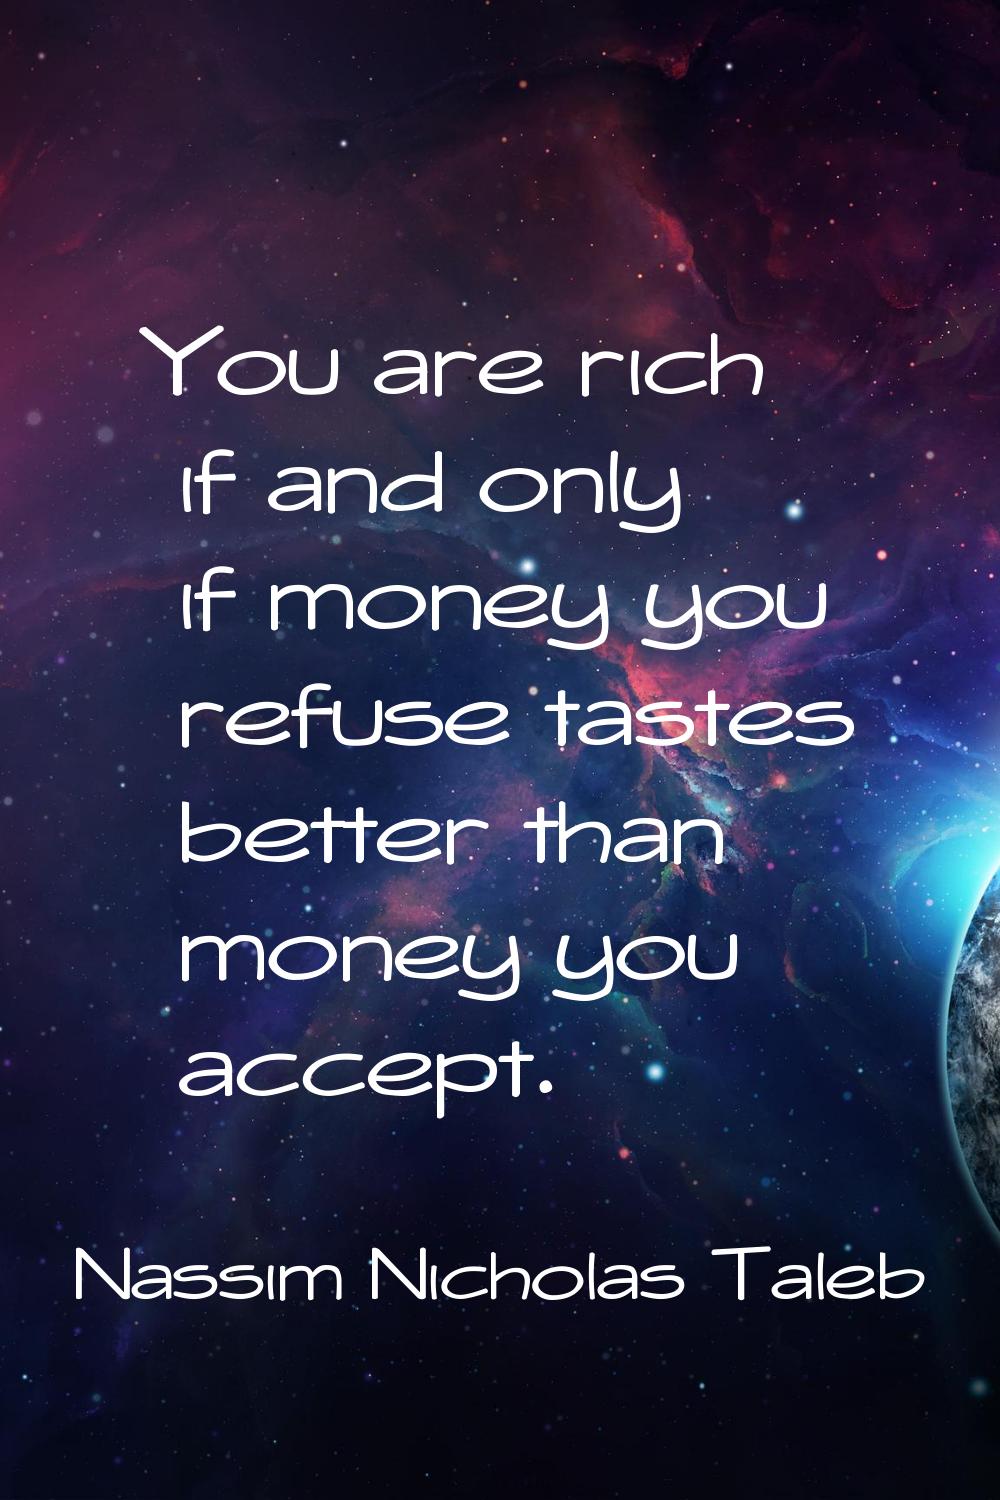 You are rich if and only if money you refuse tastes better than money you accept.